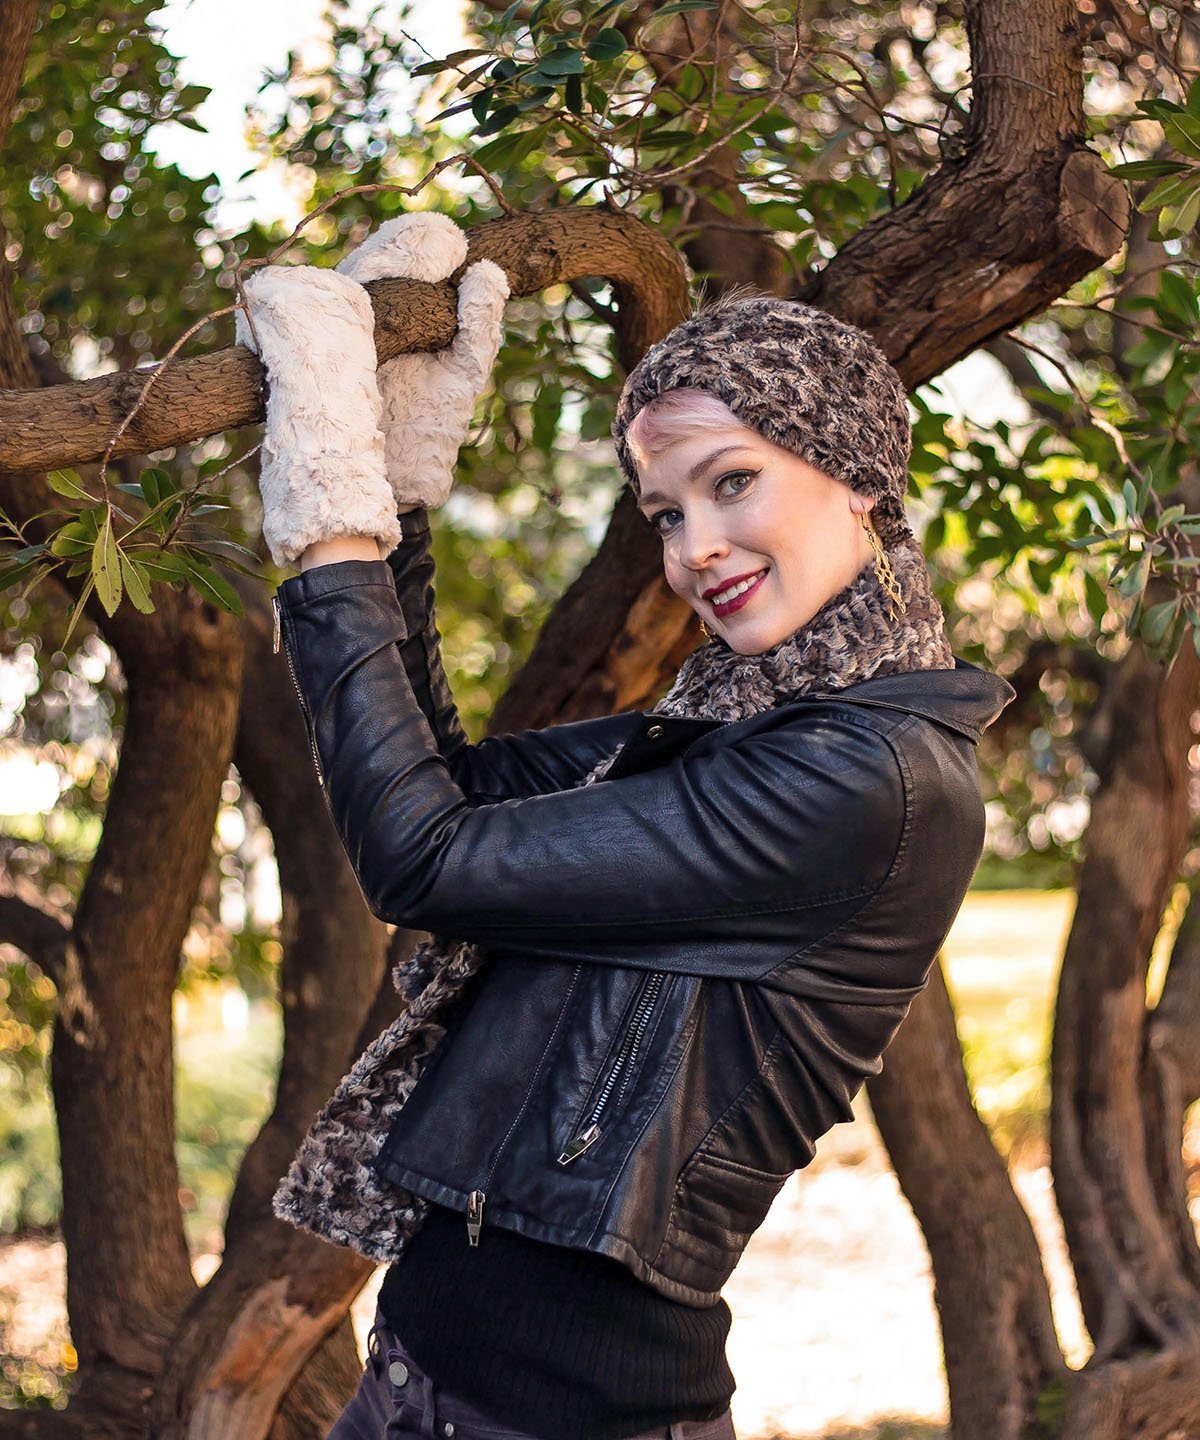 model hanging off tree in wearing a black leather jacket and faux fur Headband, scarf and mittens | Calico, brown, chocolate and Ivory Faux Fur | Handmade by Pandemonium Millinery Seattle, WA USA